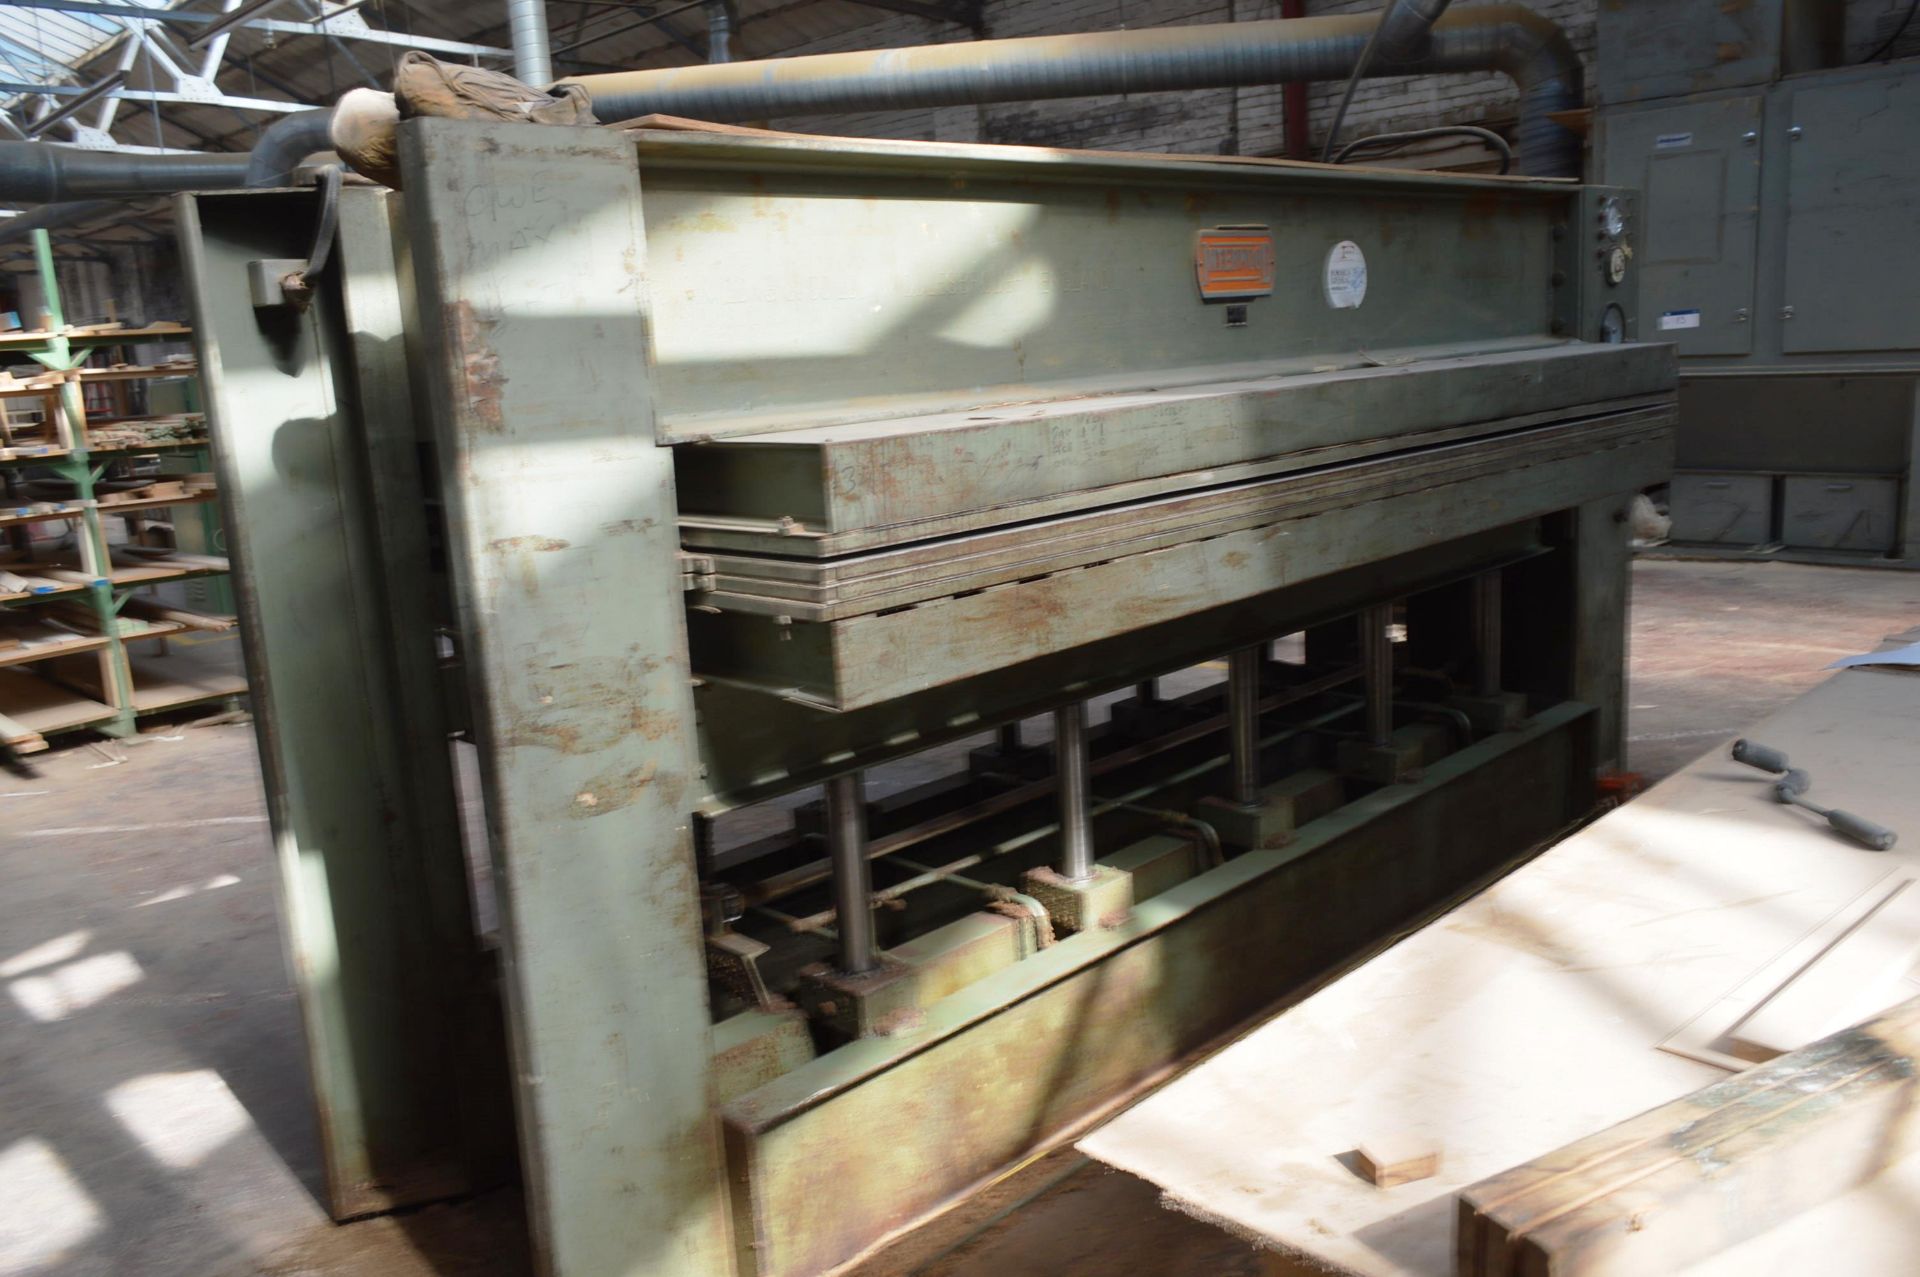 Interwood HEP 10ft x 5ft DAYLIGHT PRESS, serial no. 143, with electro-hydraulic power pack - vendors - Image 4 of 6